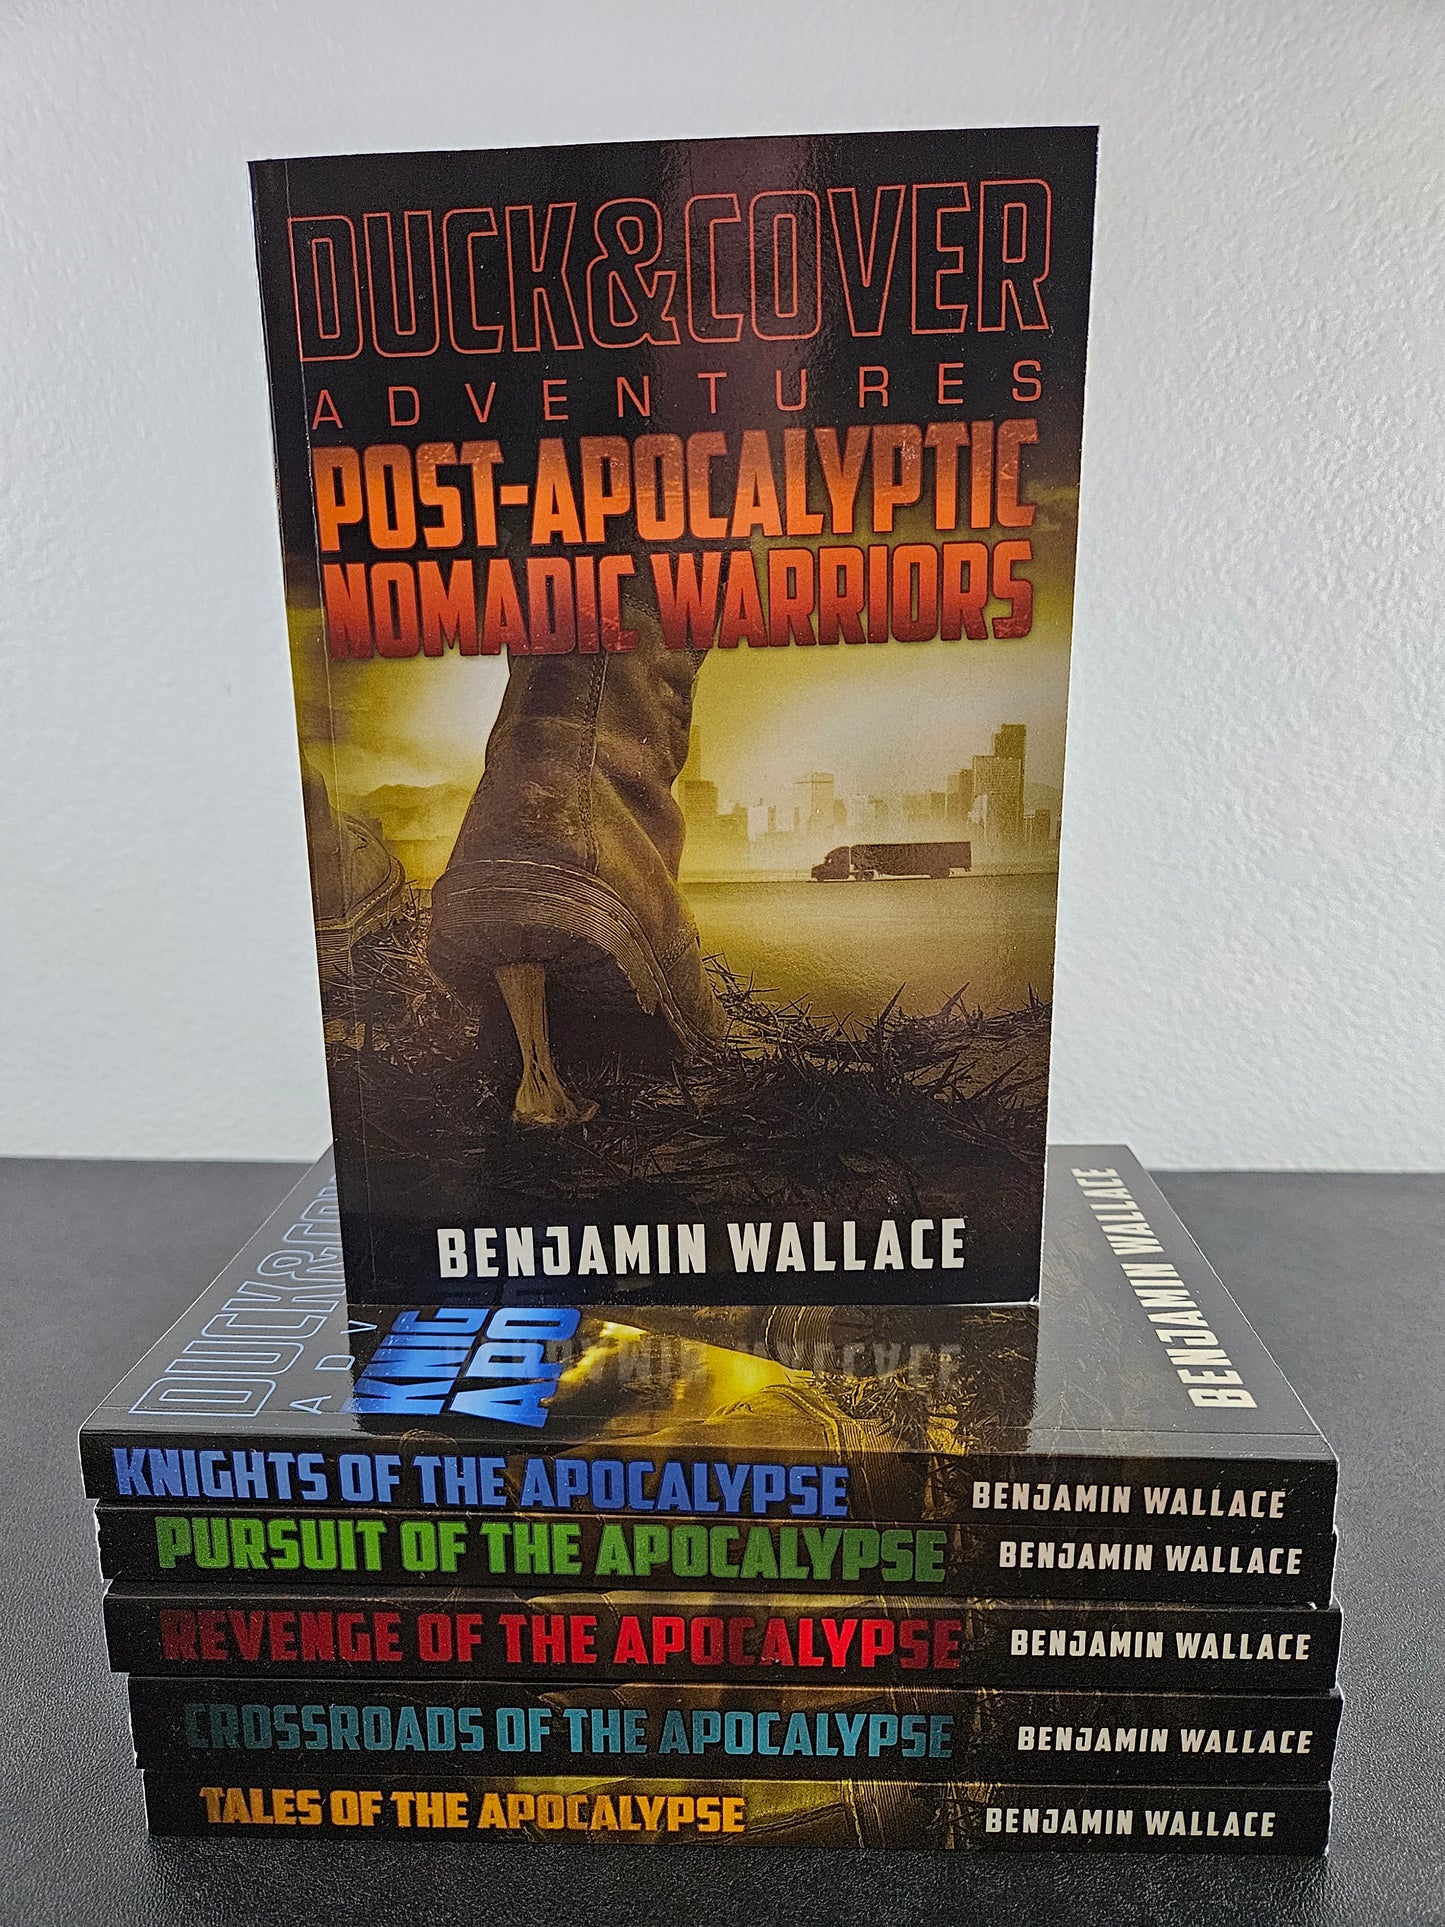 Post-Apocalyptic Nomadic Warriors: Duck & Cover Adventures Book 1 (Signed Paperback)